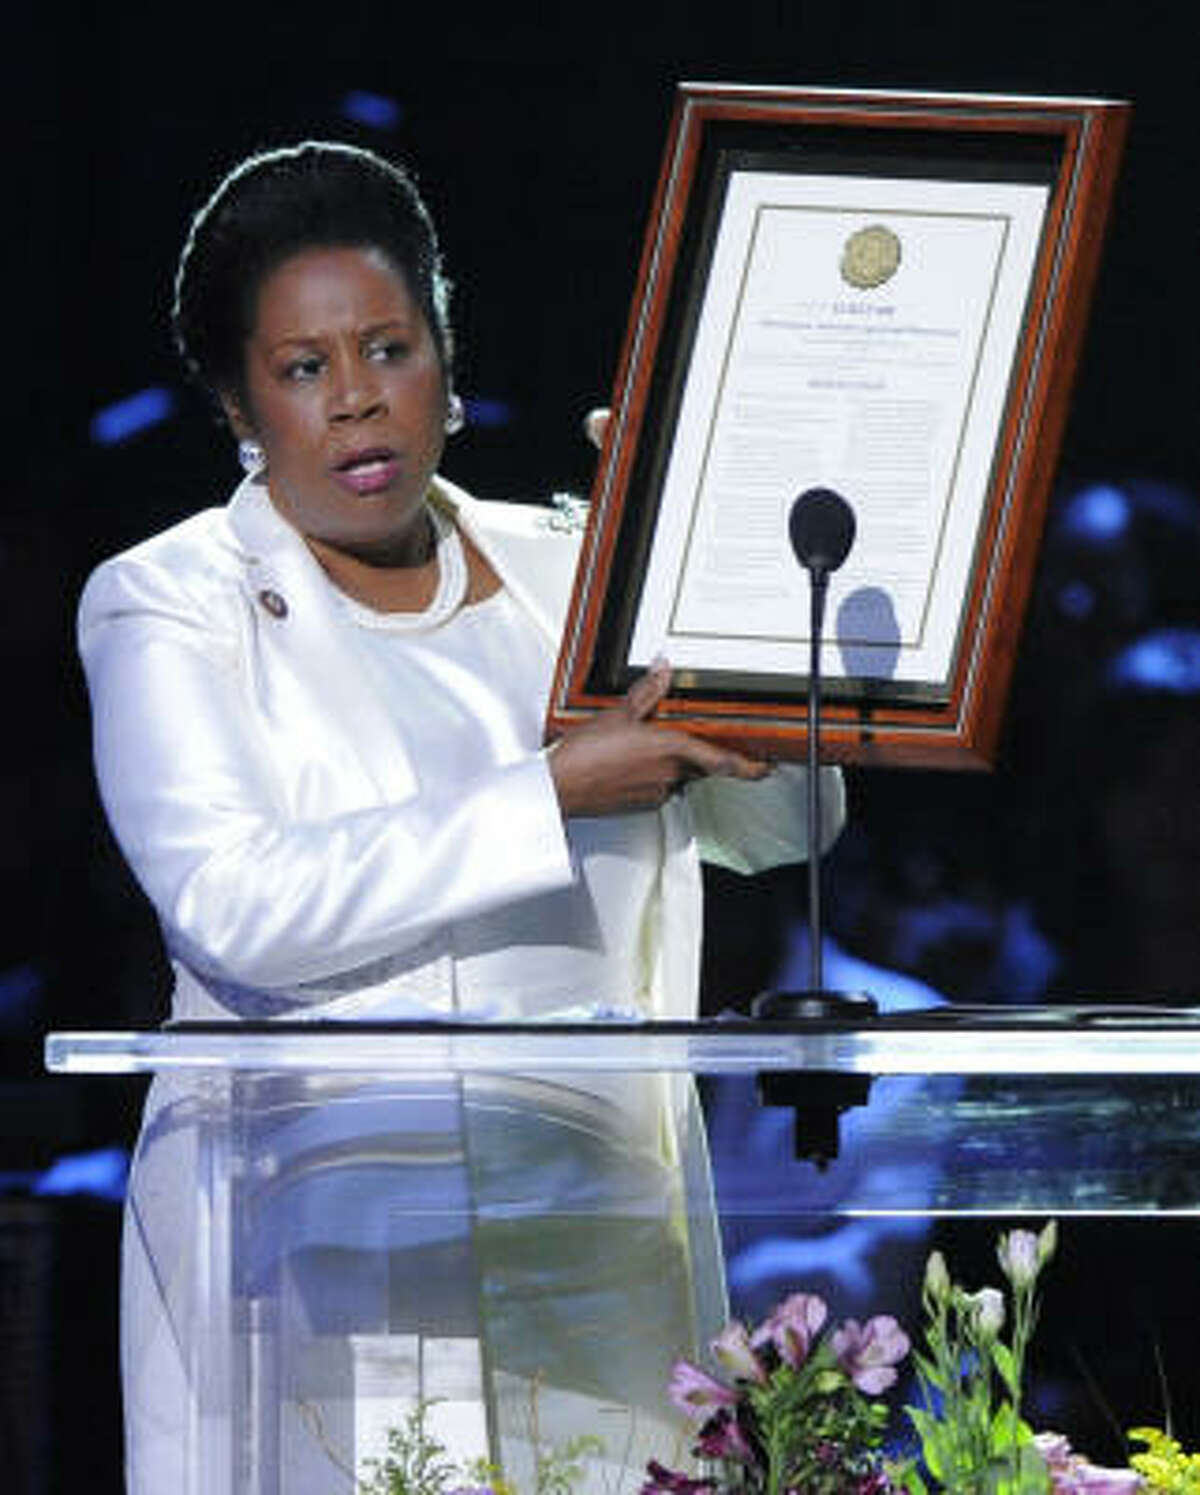 U.S. Rep. Sheila Jackson Lee, a Houston Democrat, unveiled her proposal for the tribute at Michael Jackson's memorial service on Tuesday.